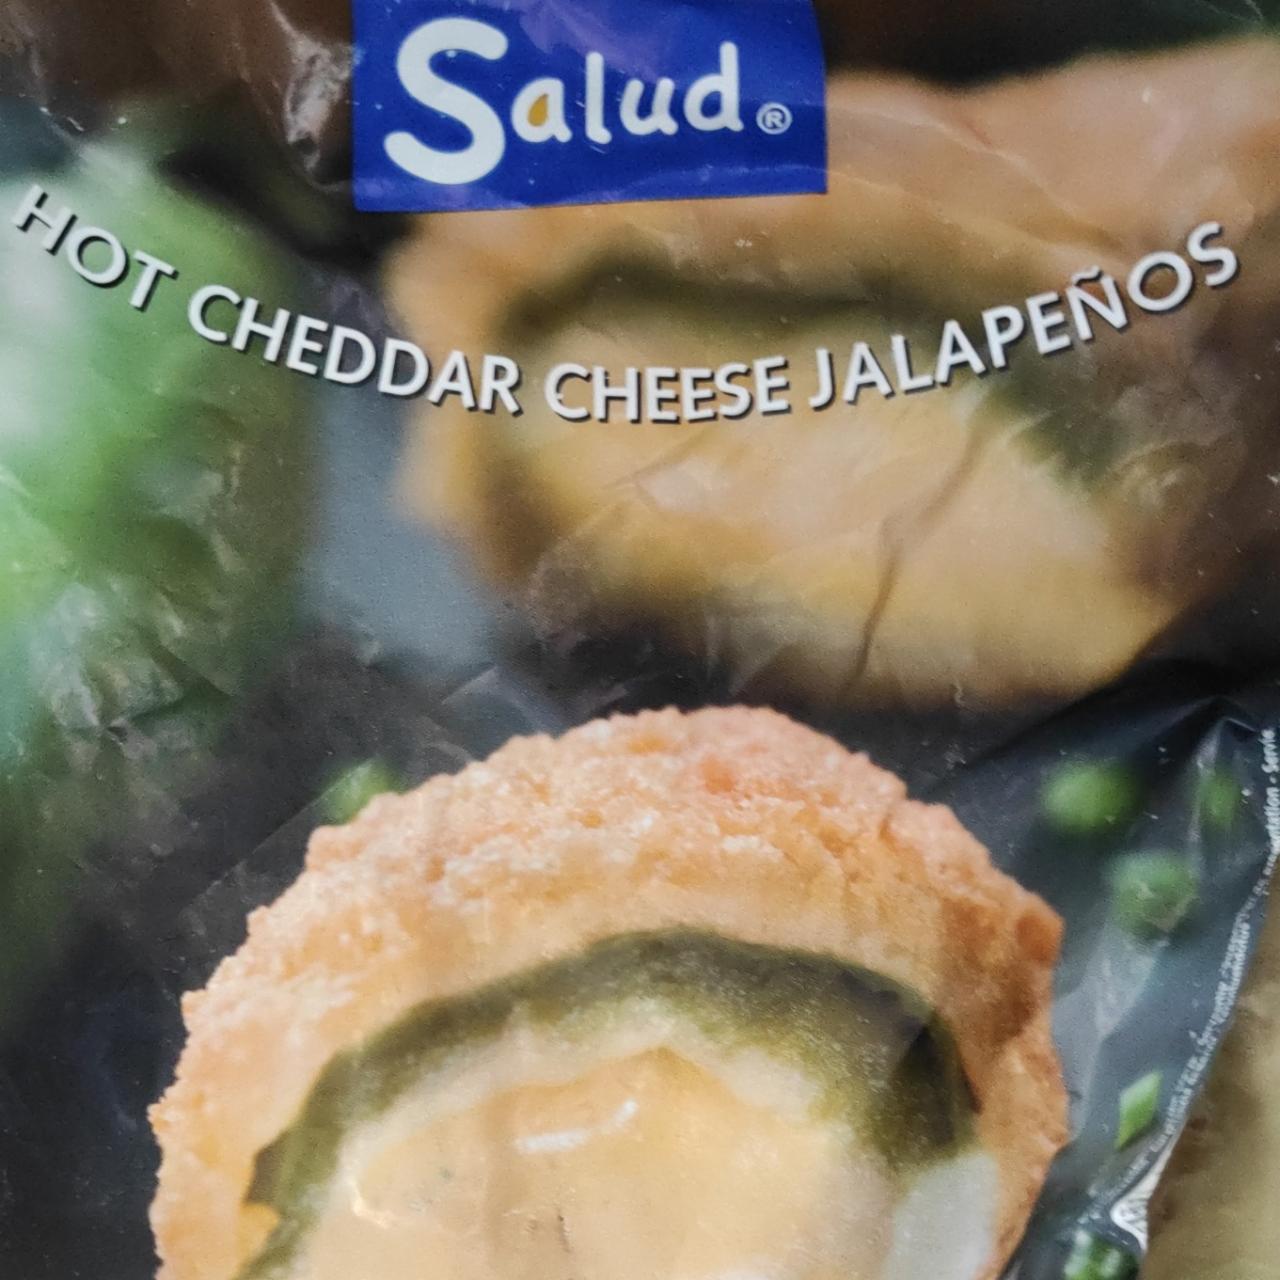 Fotografie - Hot cheddar cheese jalapeňos Salud